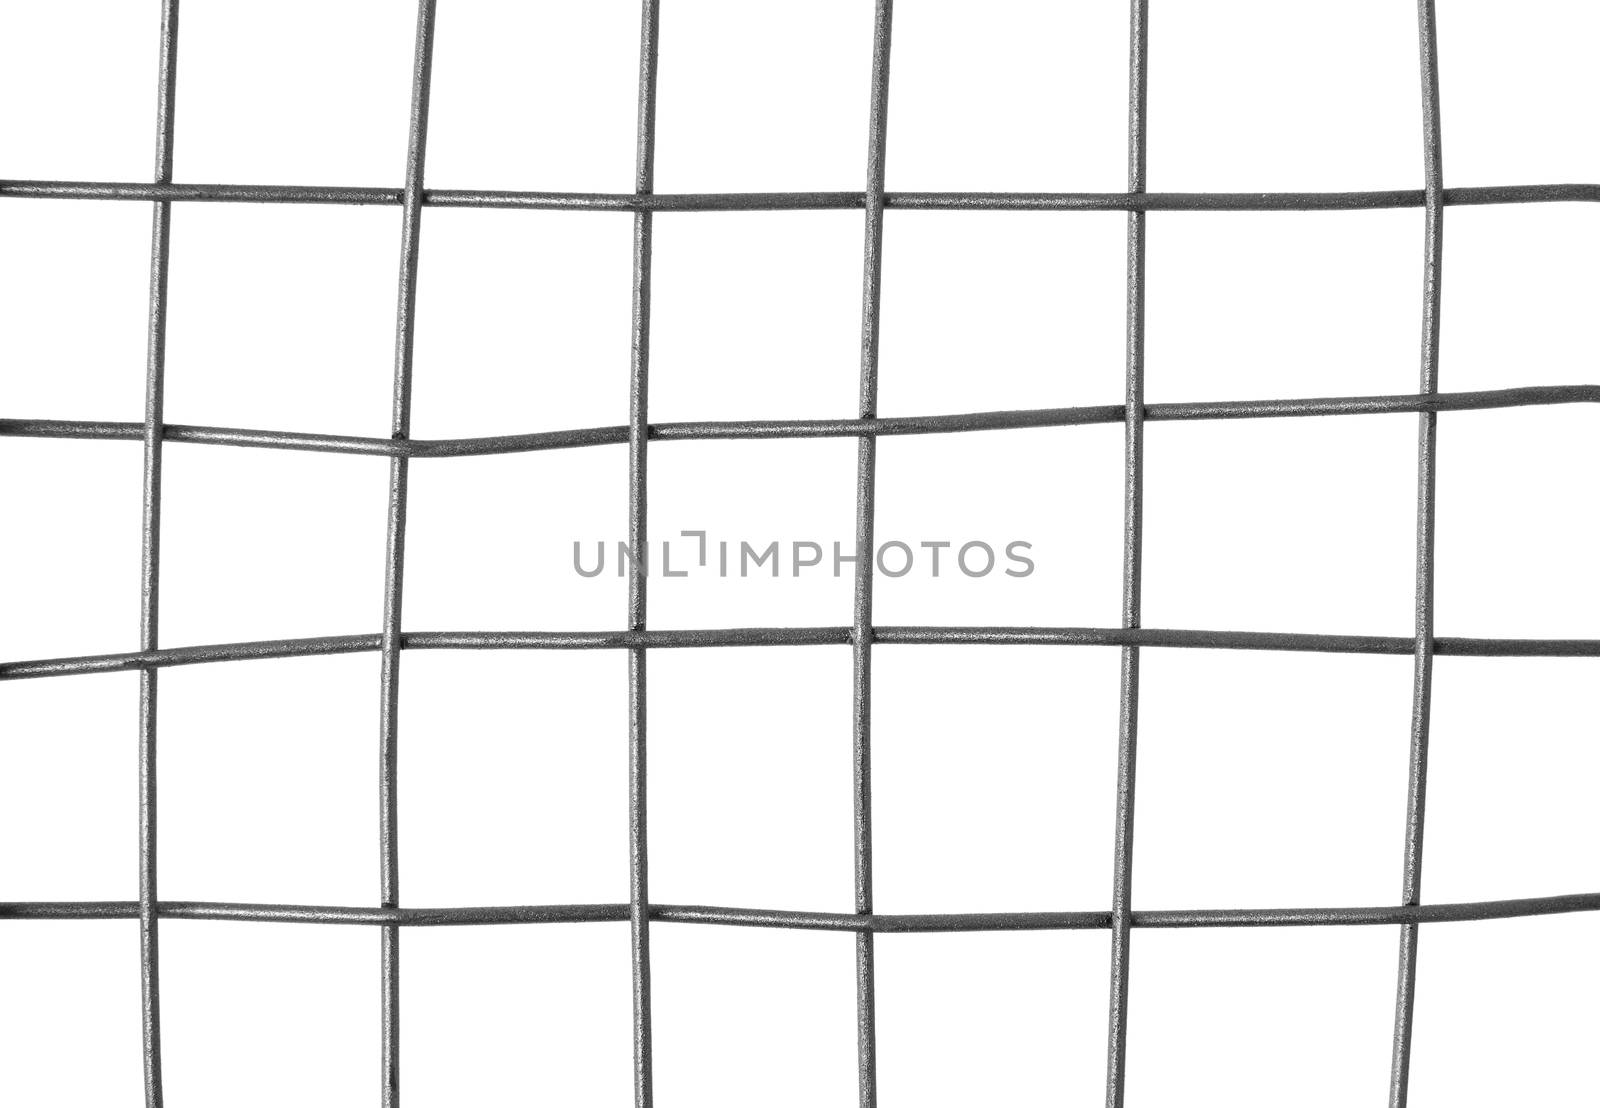 Close-up of a metal grid, isolated on white background.